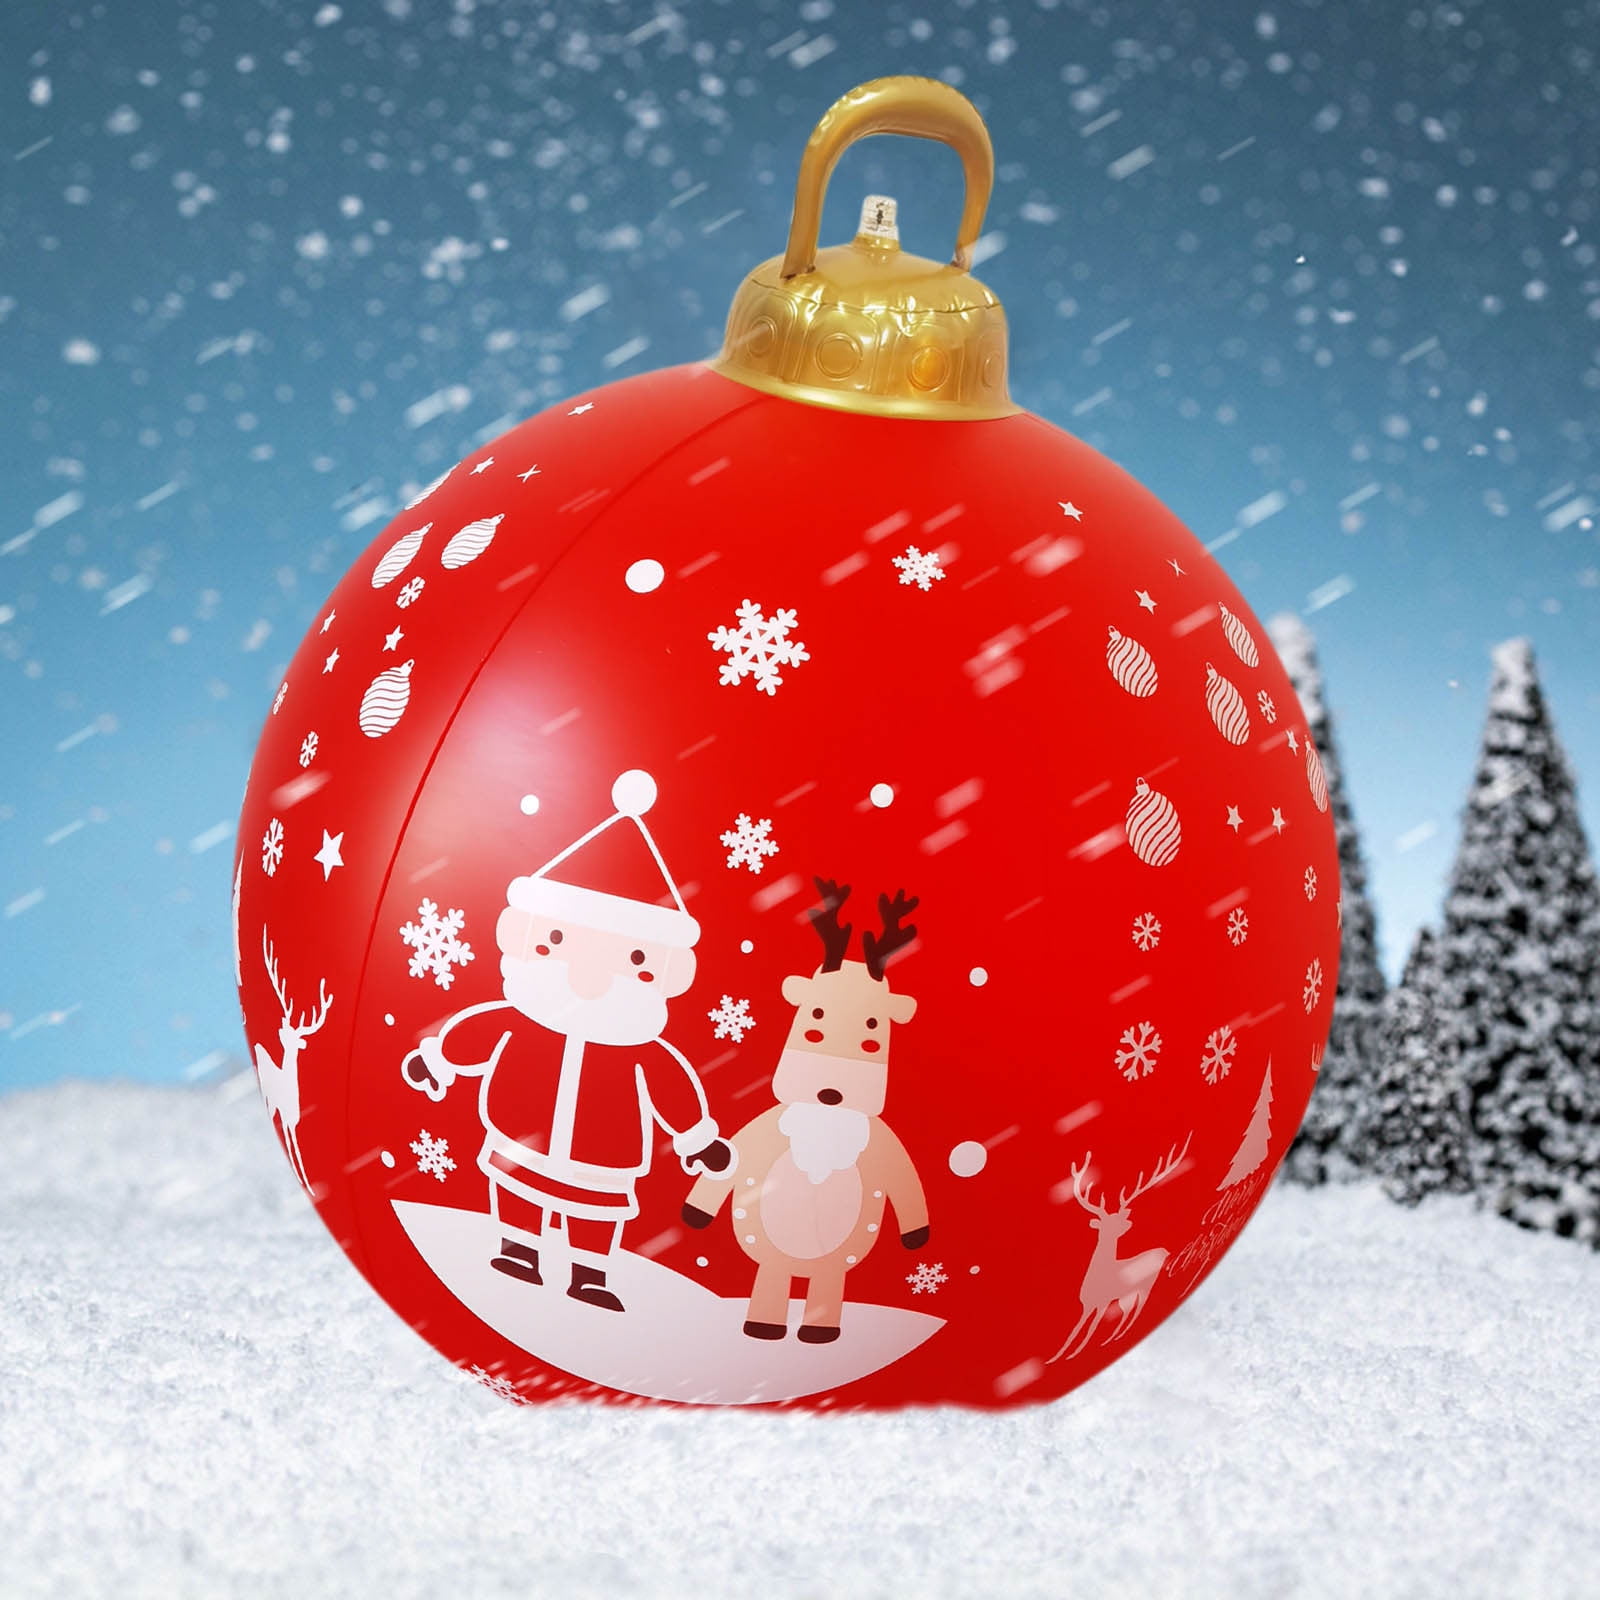 Ozmmyan 60CM Outdoor Christmas Inflatable Decorated Ball Giant ...